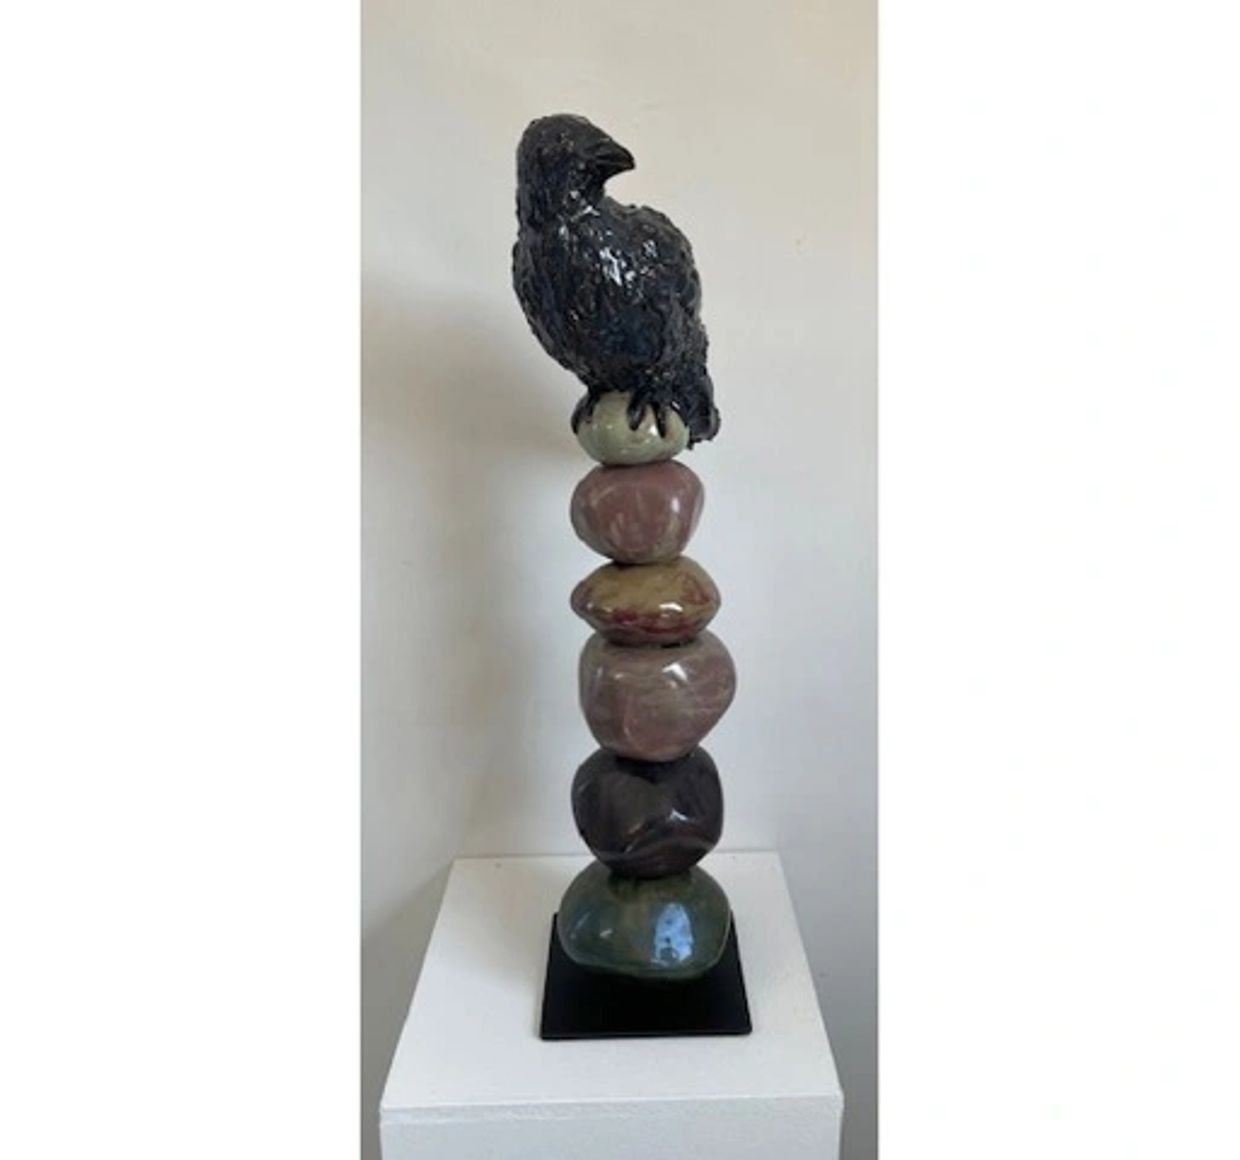 Raven on a Cairn of ceramic stones